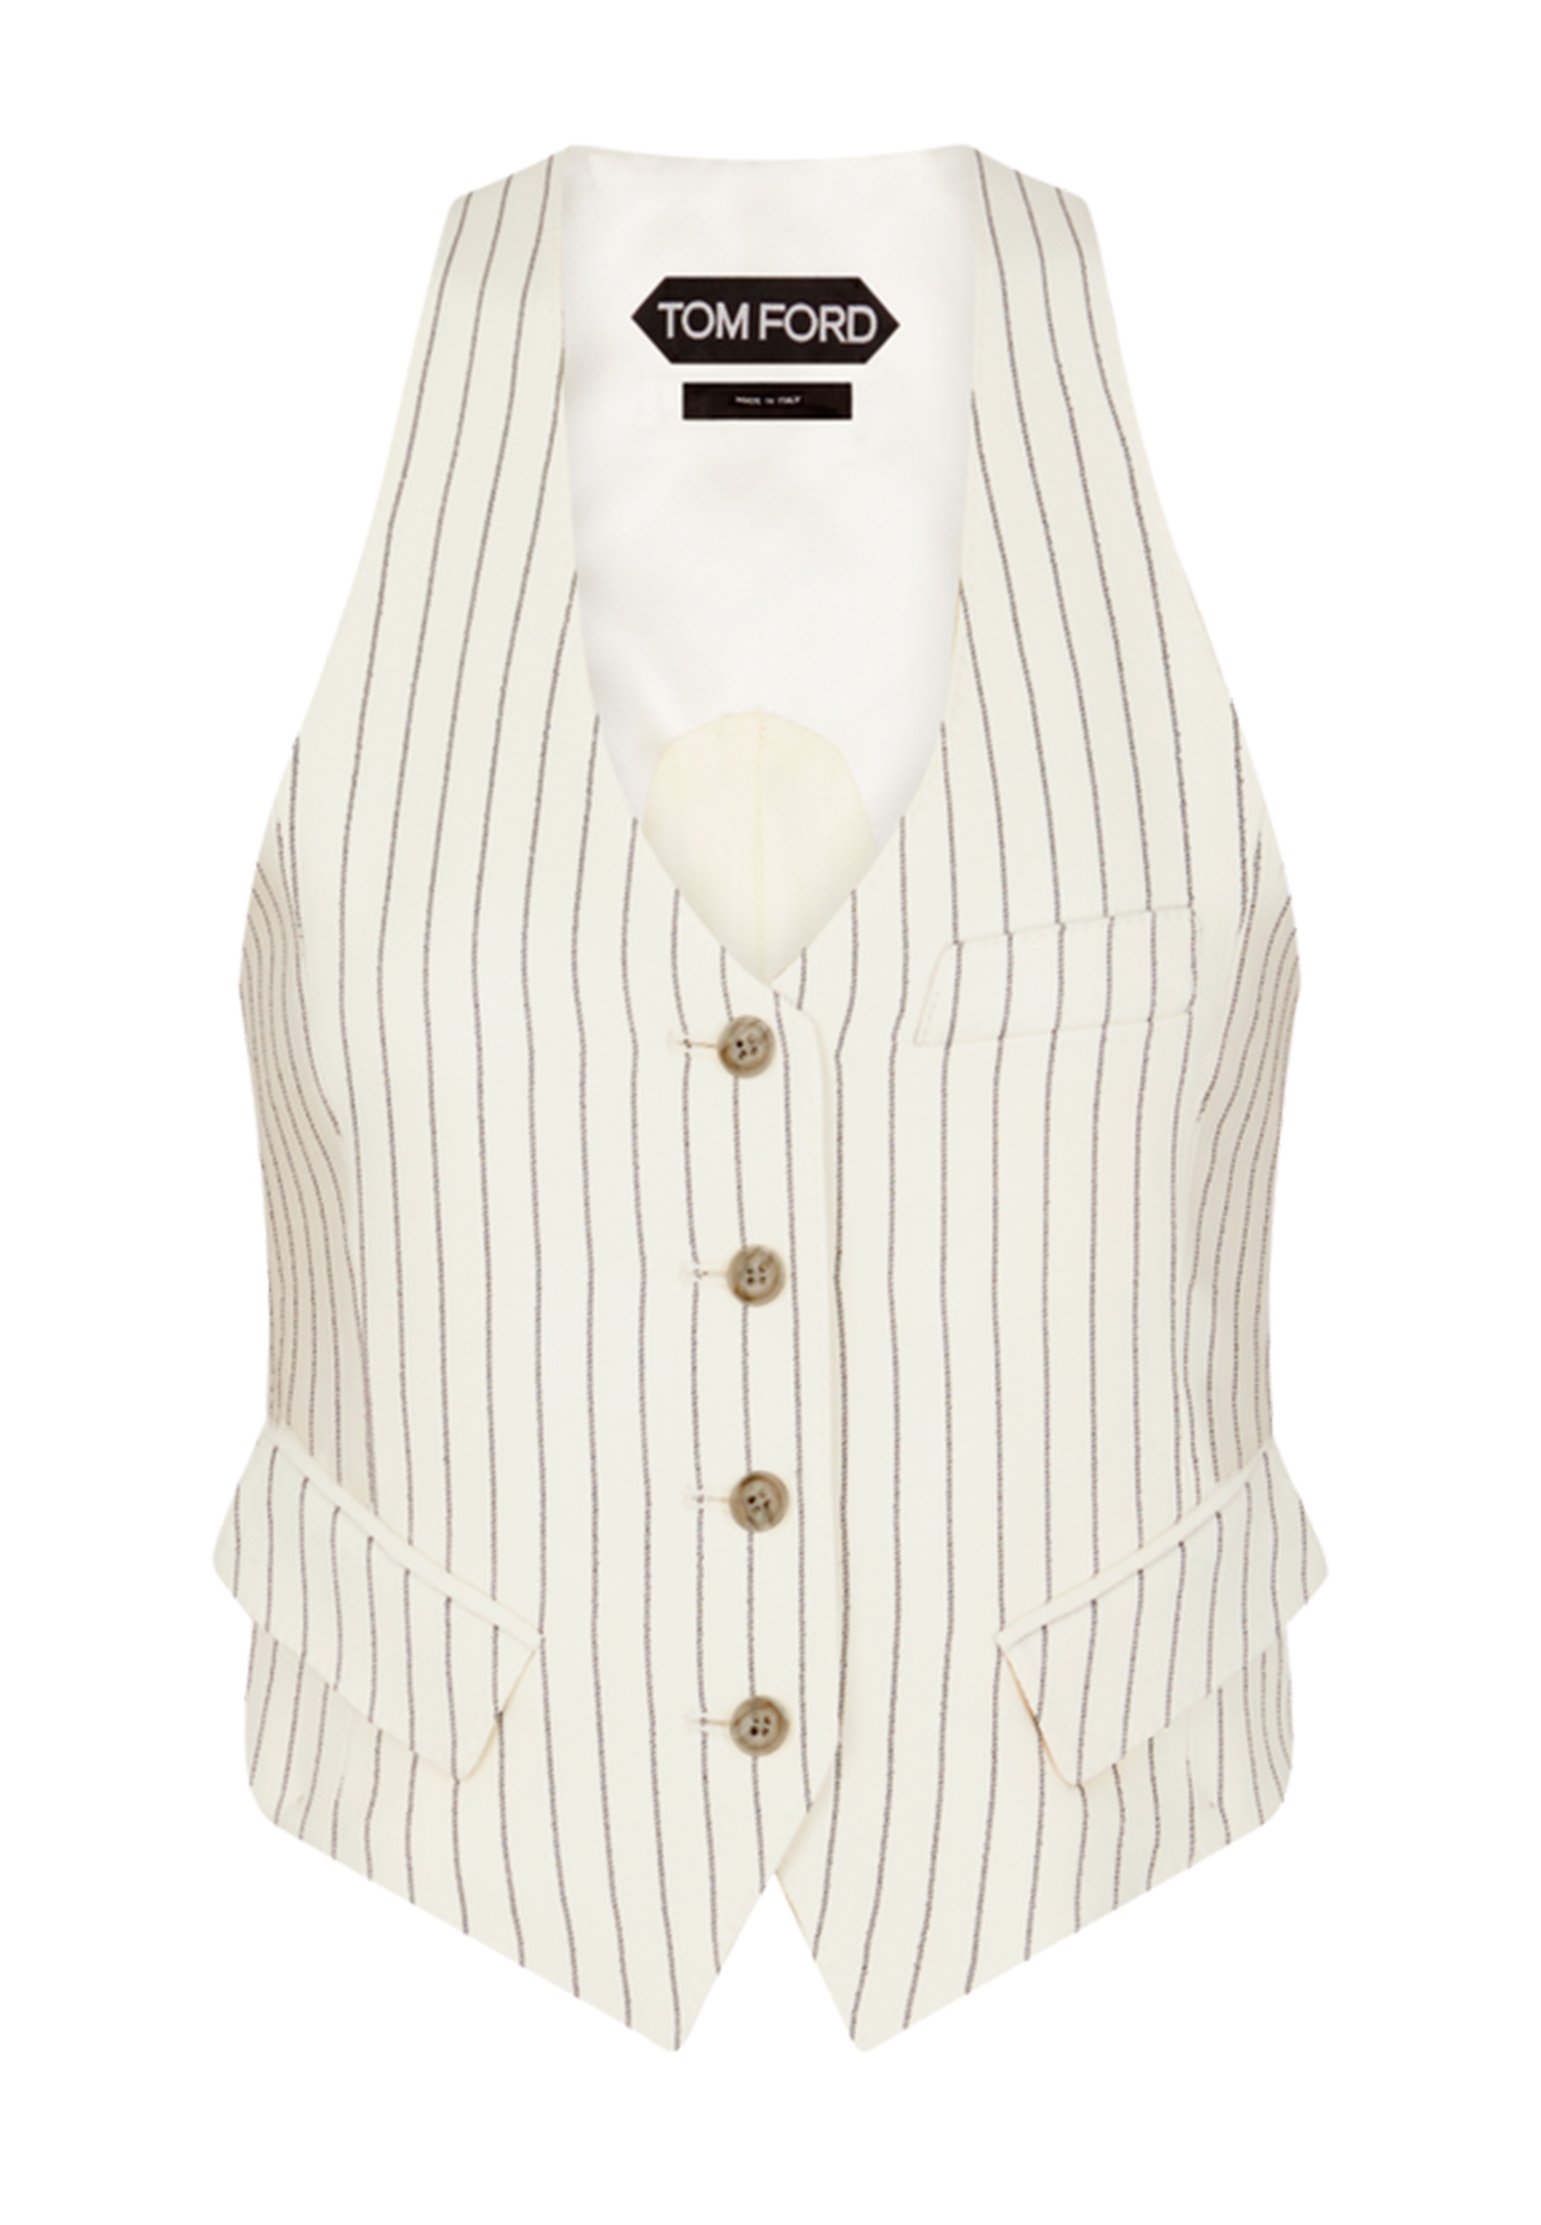 Waistcoat TOM FORD Color: cream (Code: 3705) in online store Allure